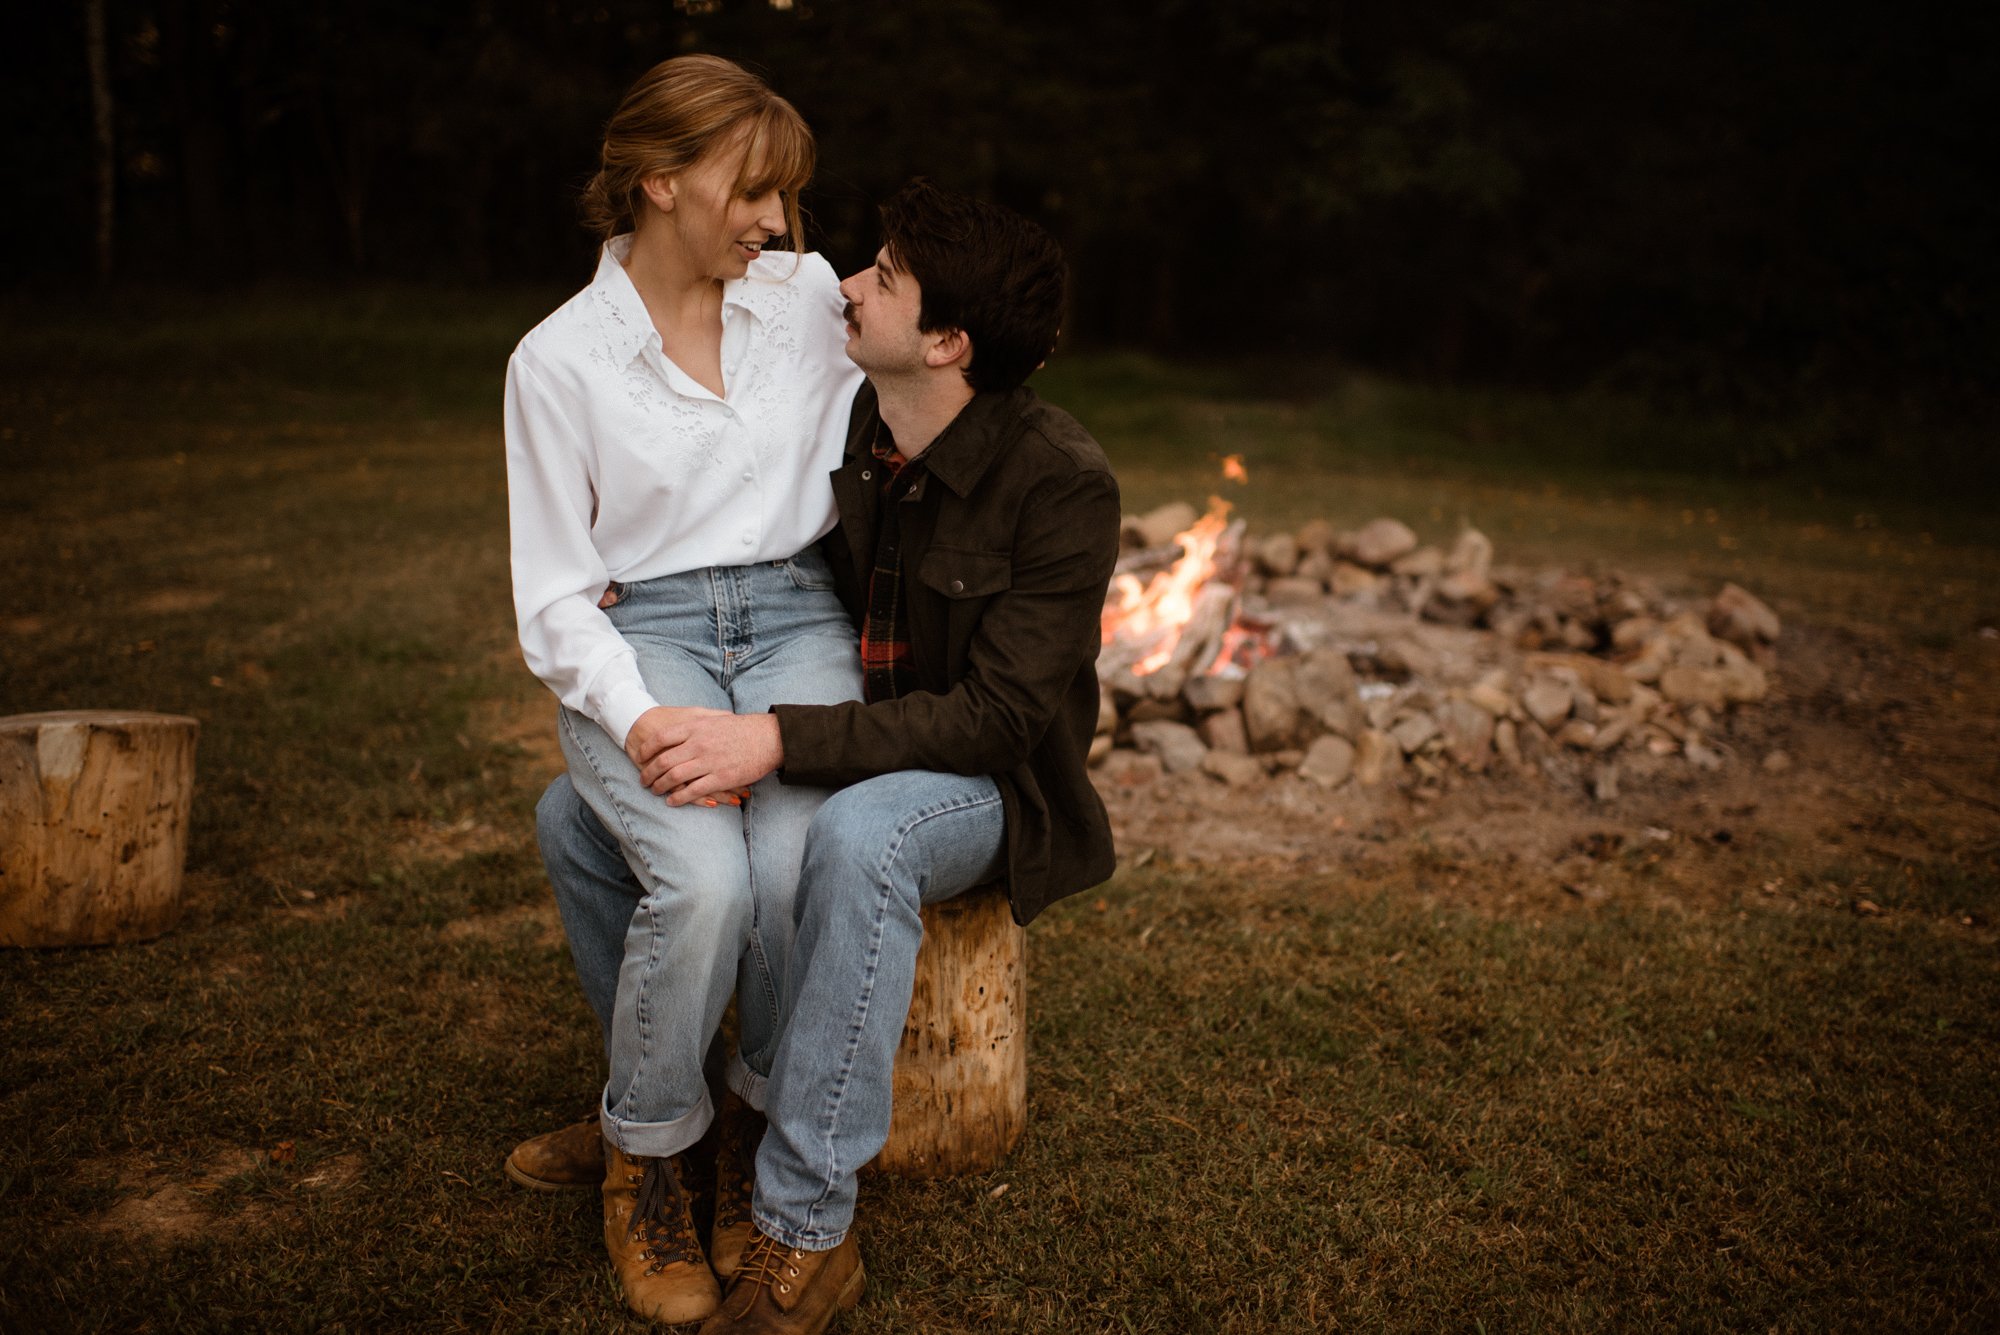 Sill and Glade Cabin Elopement in Virginia - Mountain Airbnb Elopement - White Sails Creative - Blue Ridge Mountains Elopement Cabin Inspiration_40.jpg